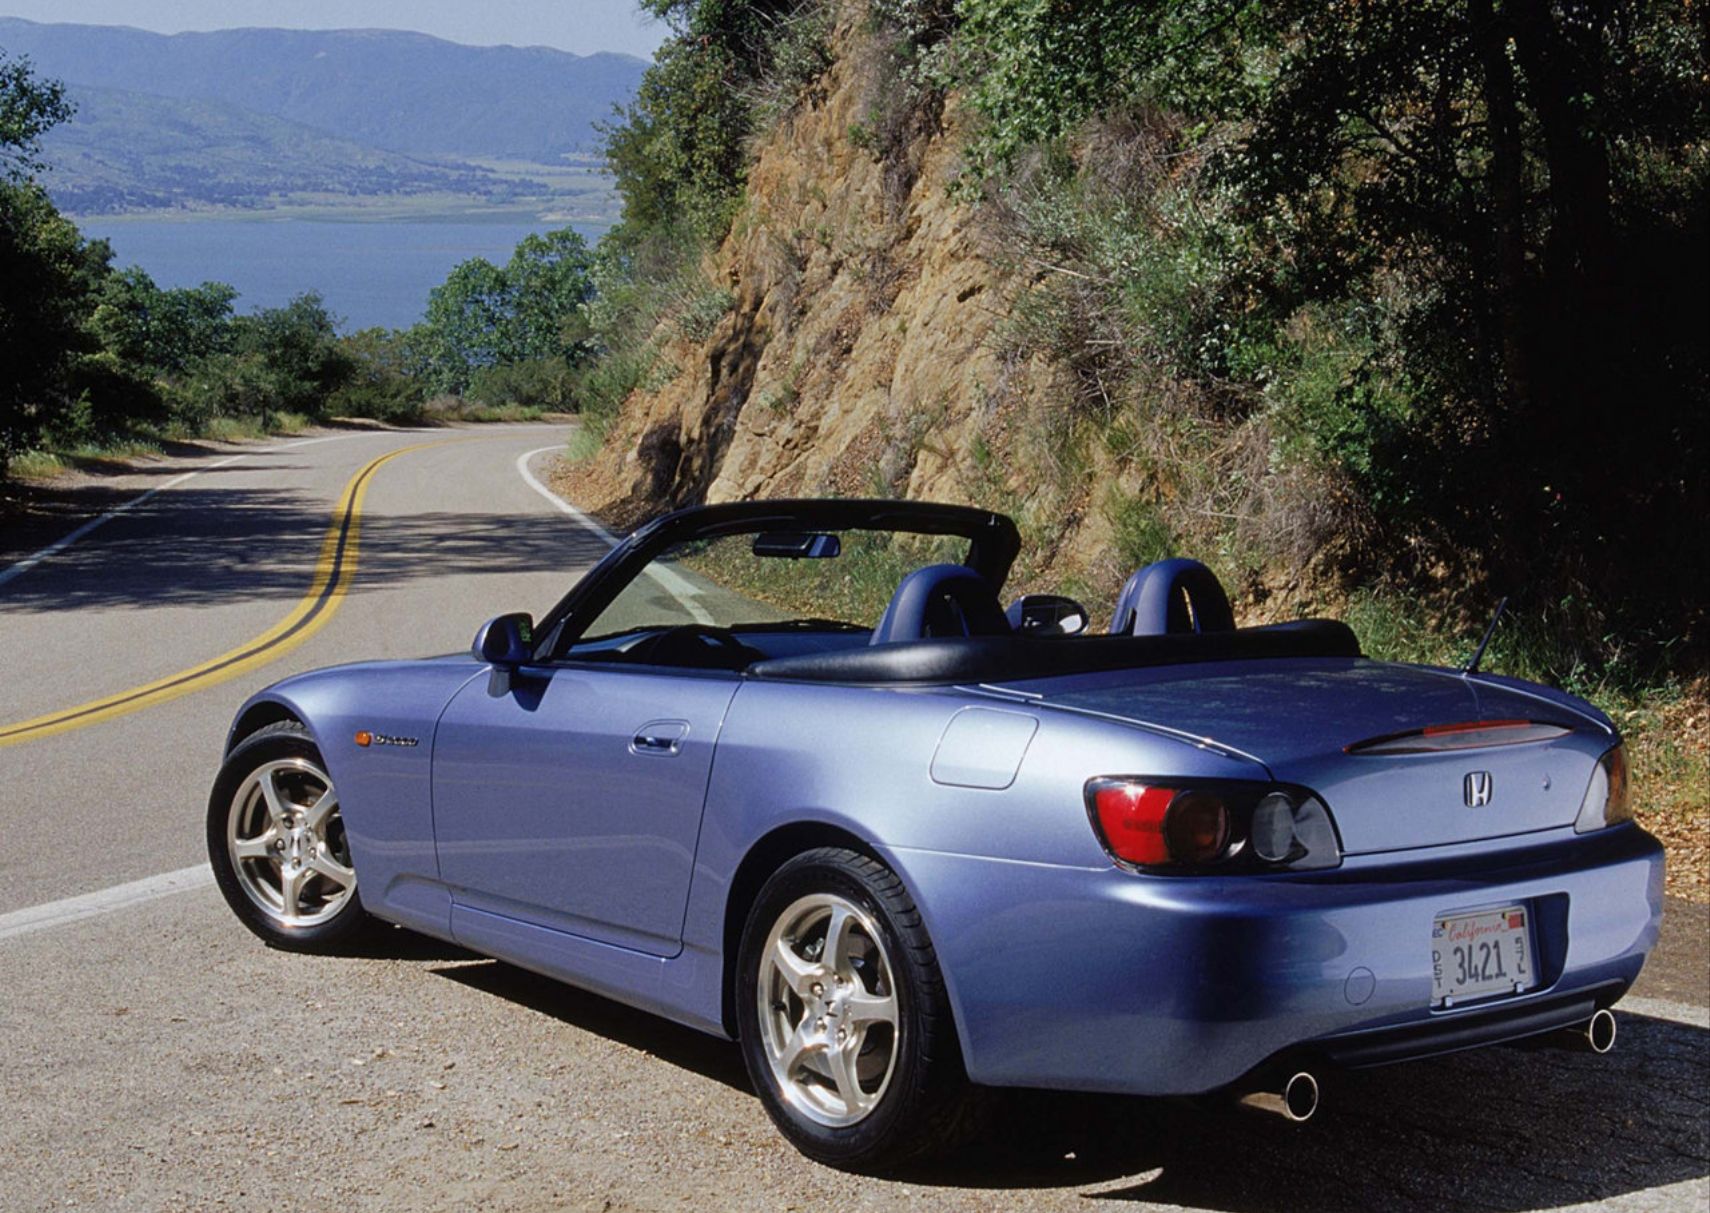 Honda S2000-2002 rear view parked in blue